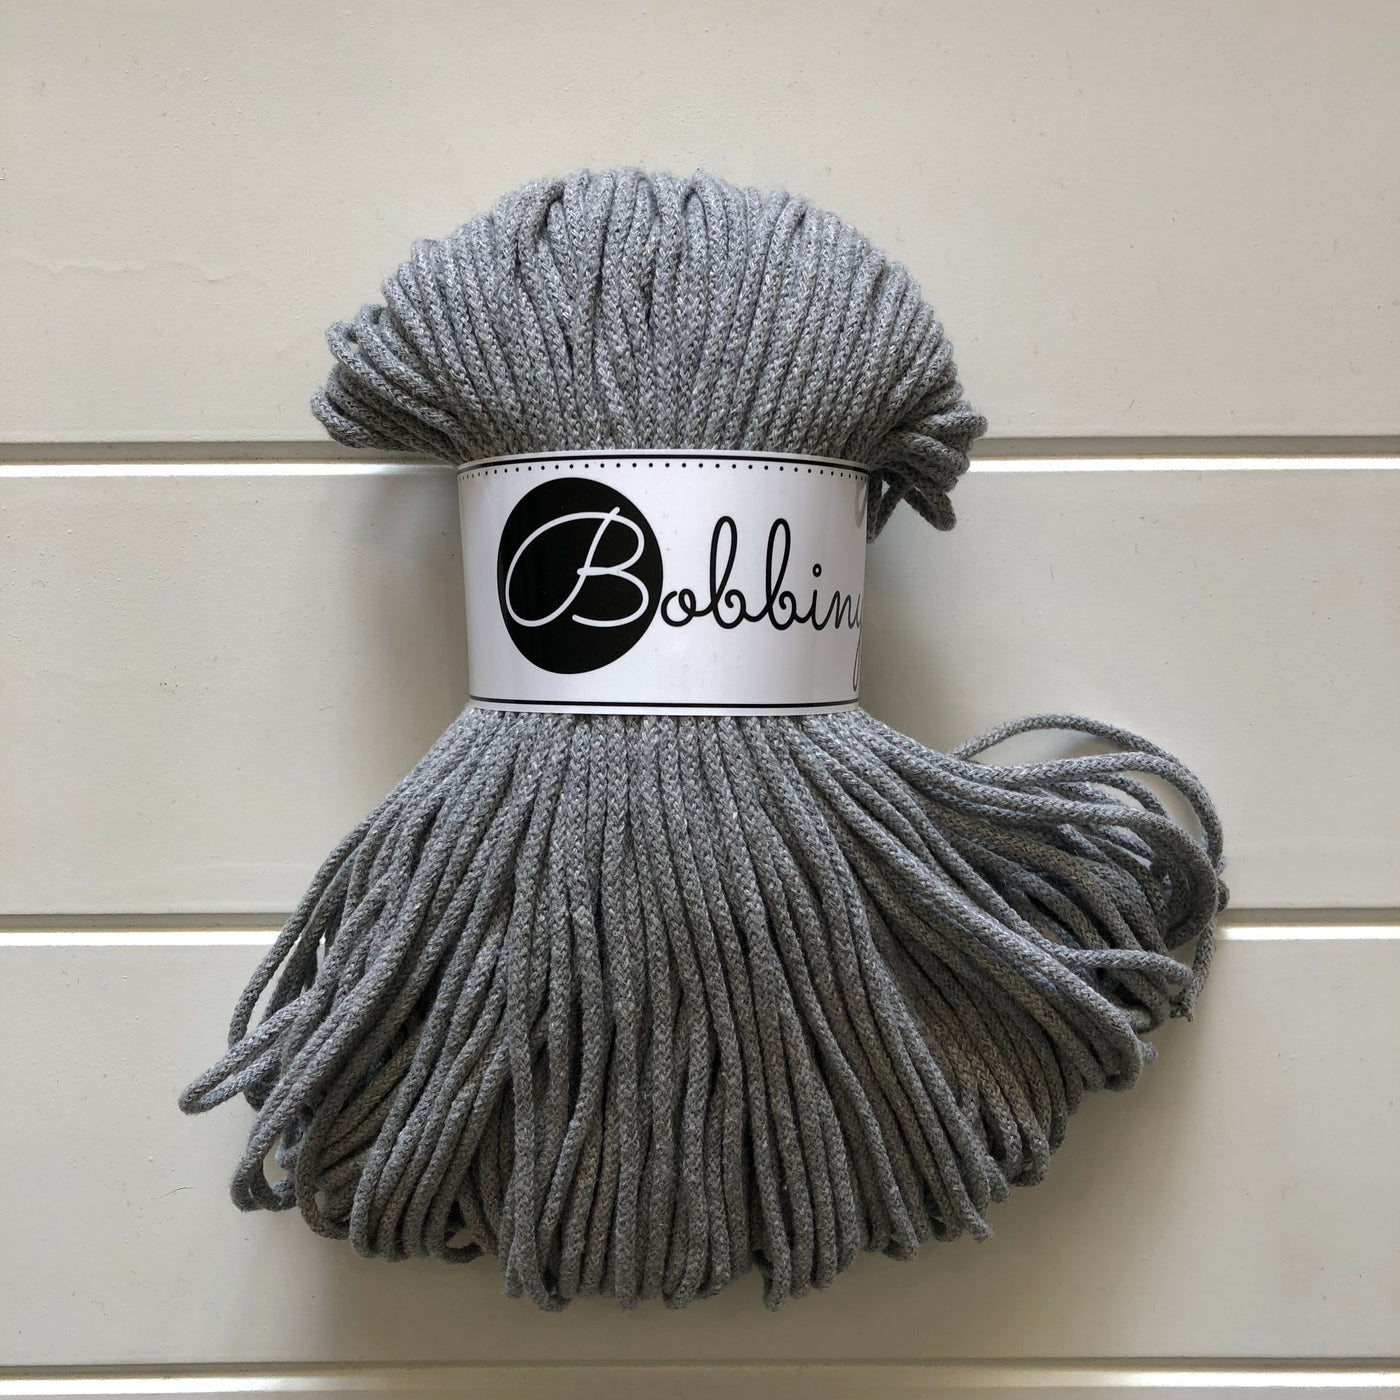 These beautiful Bobbiny ropes are made in Poland, and are non-toxic and certified safe for children, meeting certified worldwide textile standards.  3mm Diameter  100 metres Length  Recommended for use with 8-10mm crochet or knitting needles  Cotton inner and outer layers, perfect for use with Macrame, Crochet or Knitting